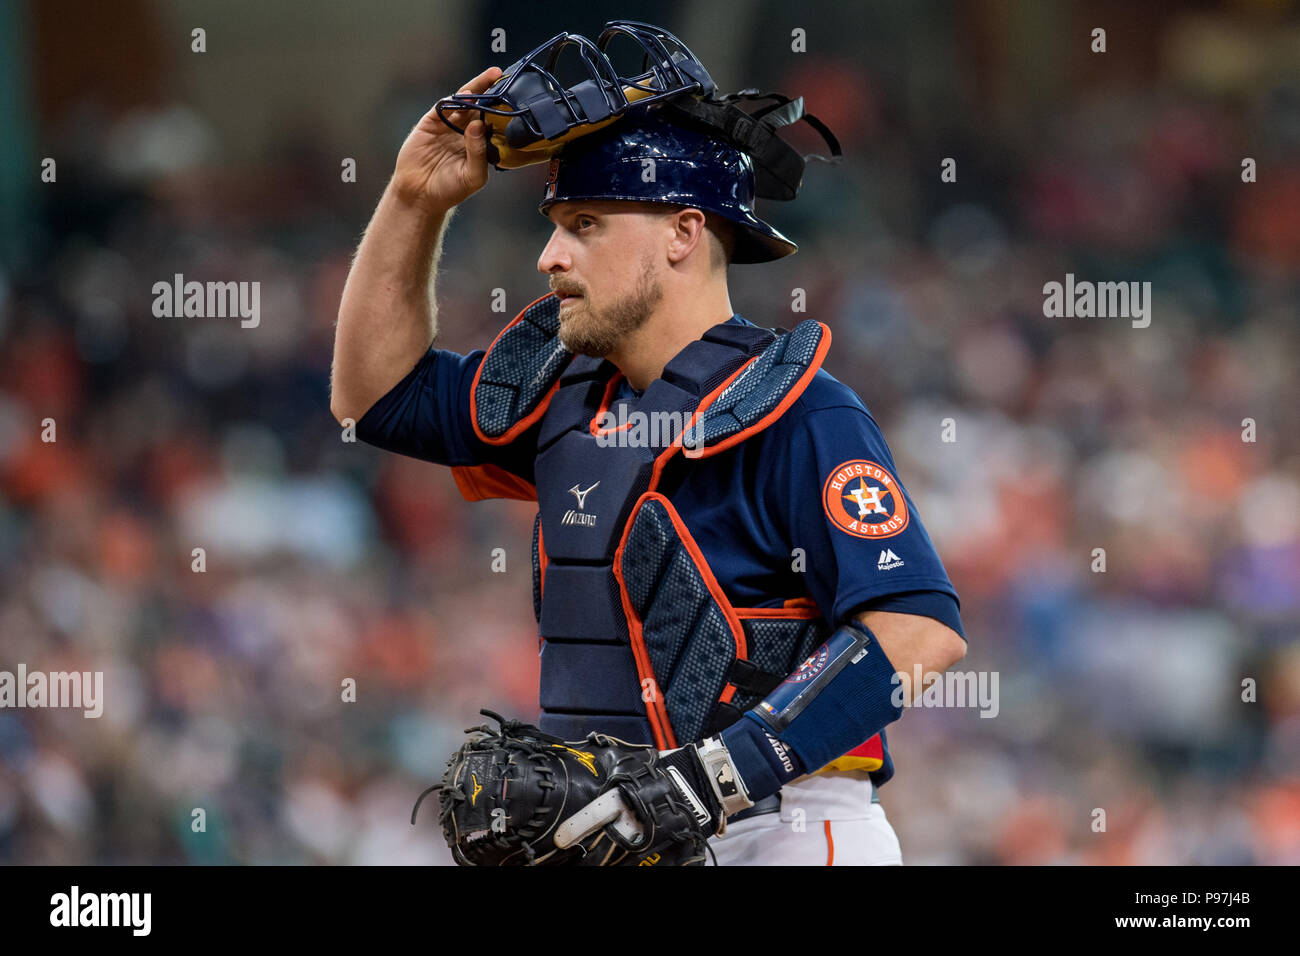 Houston, TX, USA. 15th July, 2018. Houston Astros catcher Tim Federowicz (19) during a Major League Baseball game between the Houston Astros and the Detroit Tigers at Minute Maid Park in Houston, TX. The Tigers won the game 6 to 3.Trask Smith/CSM/Alamy Live News Stock Photo